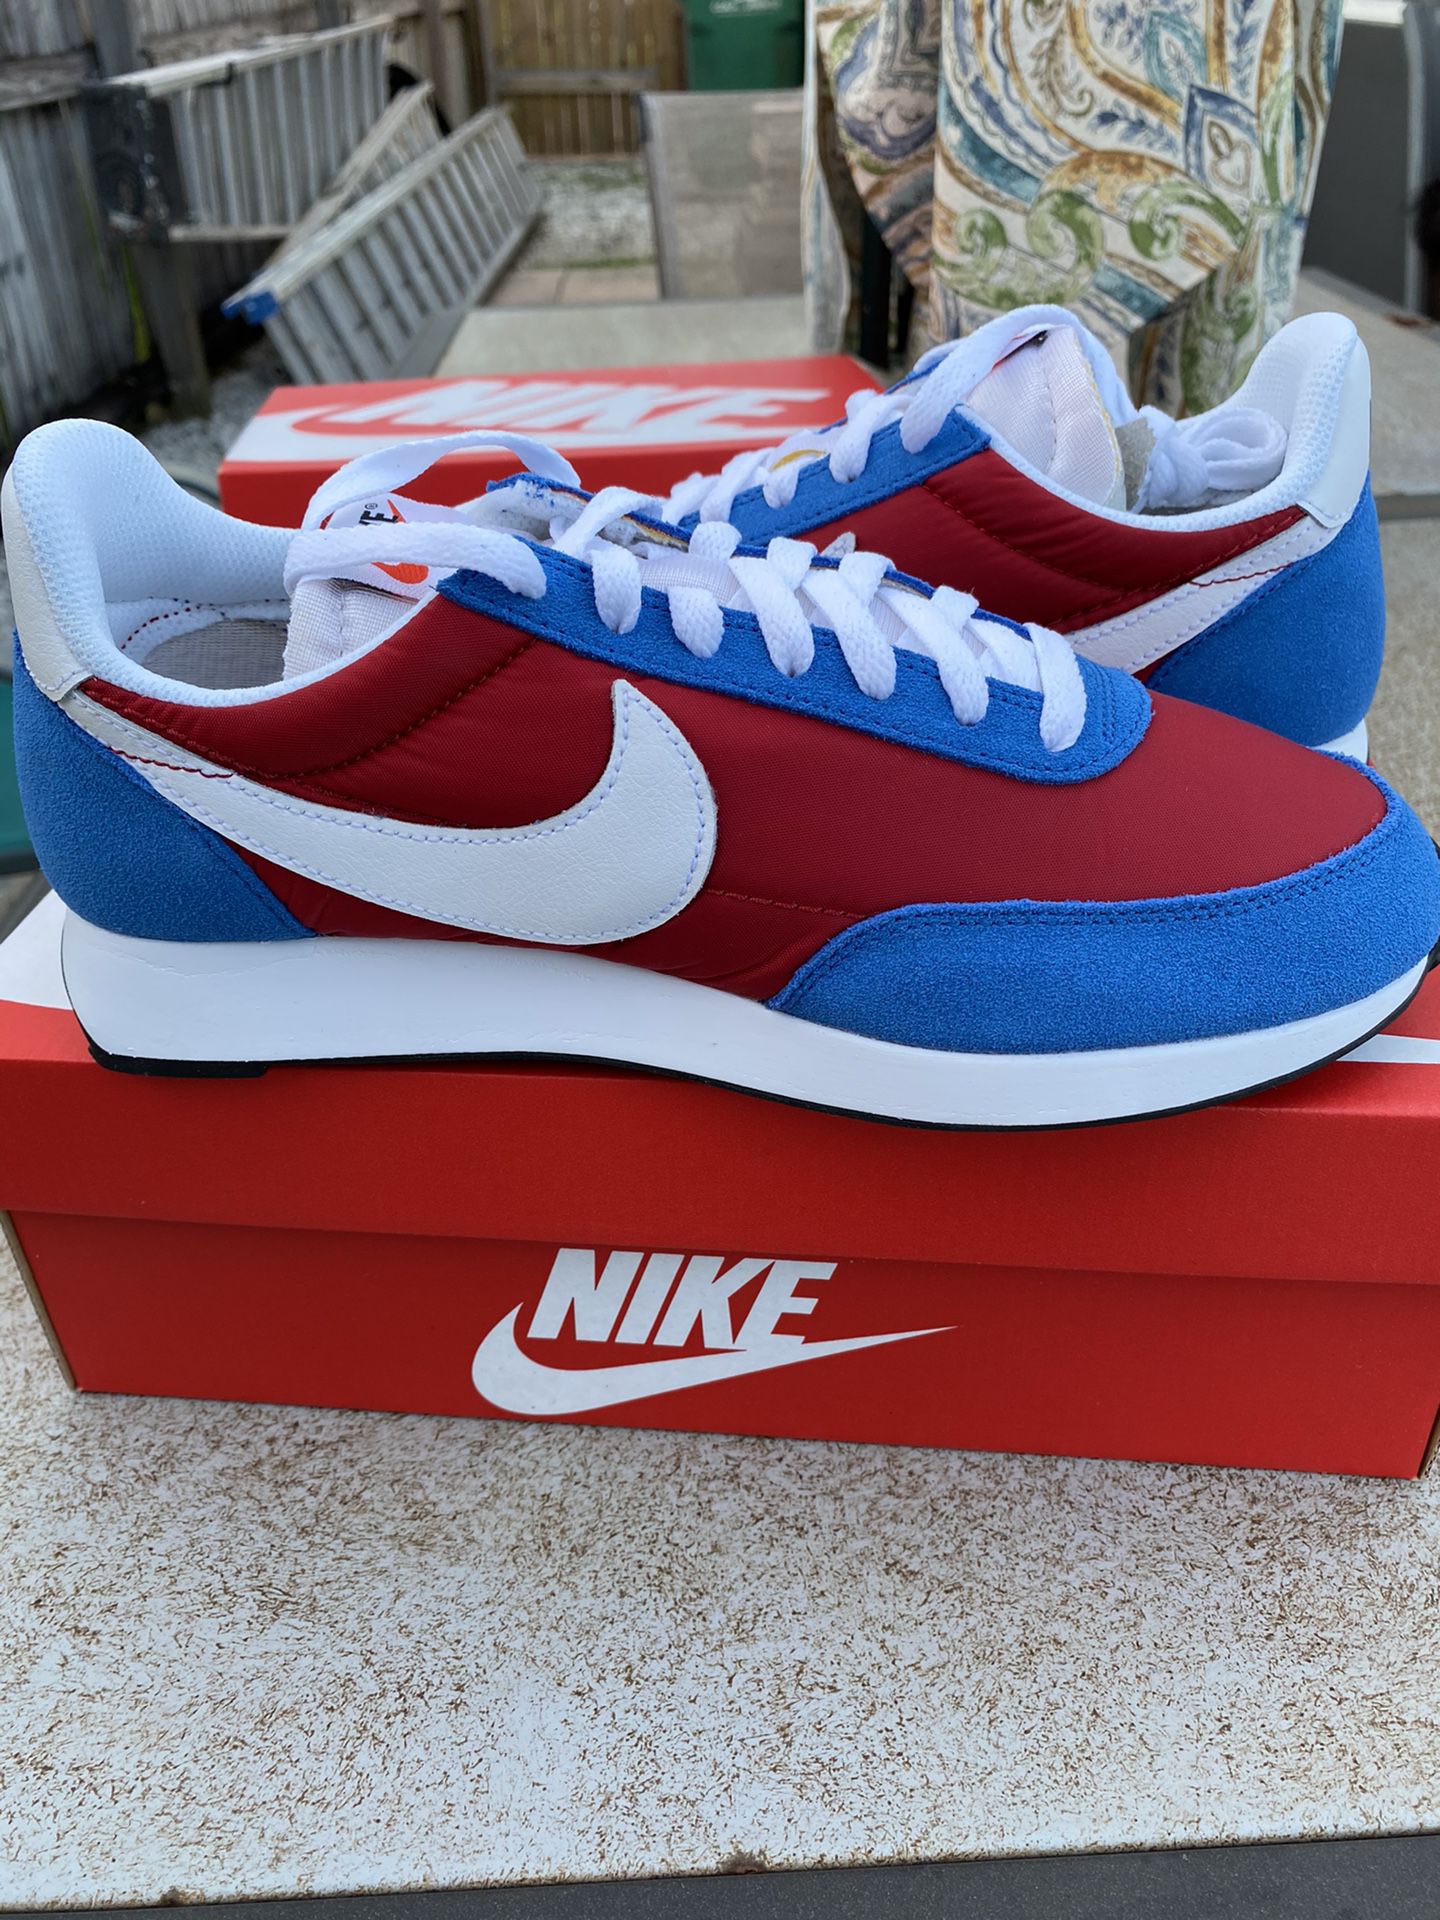 NIKE AIR TAILWIND 79 *DS size 8*